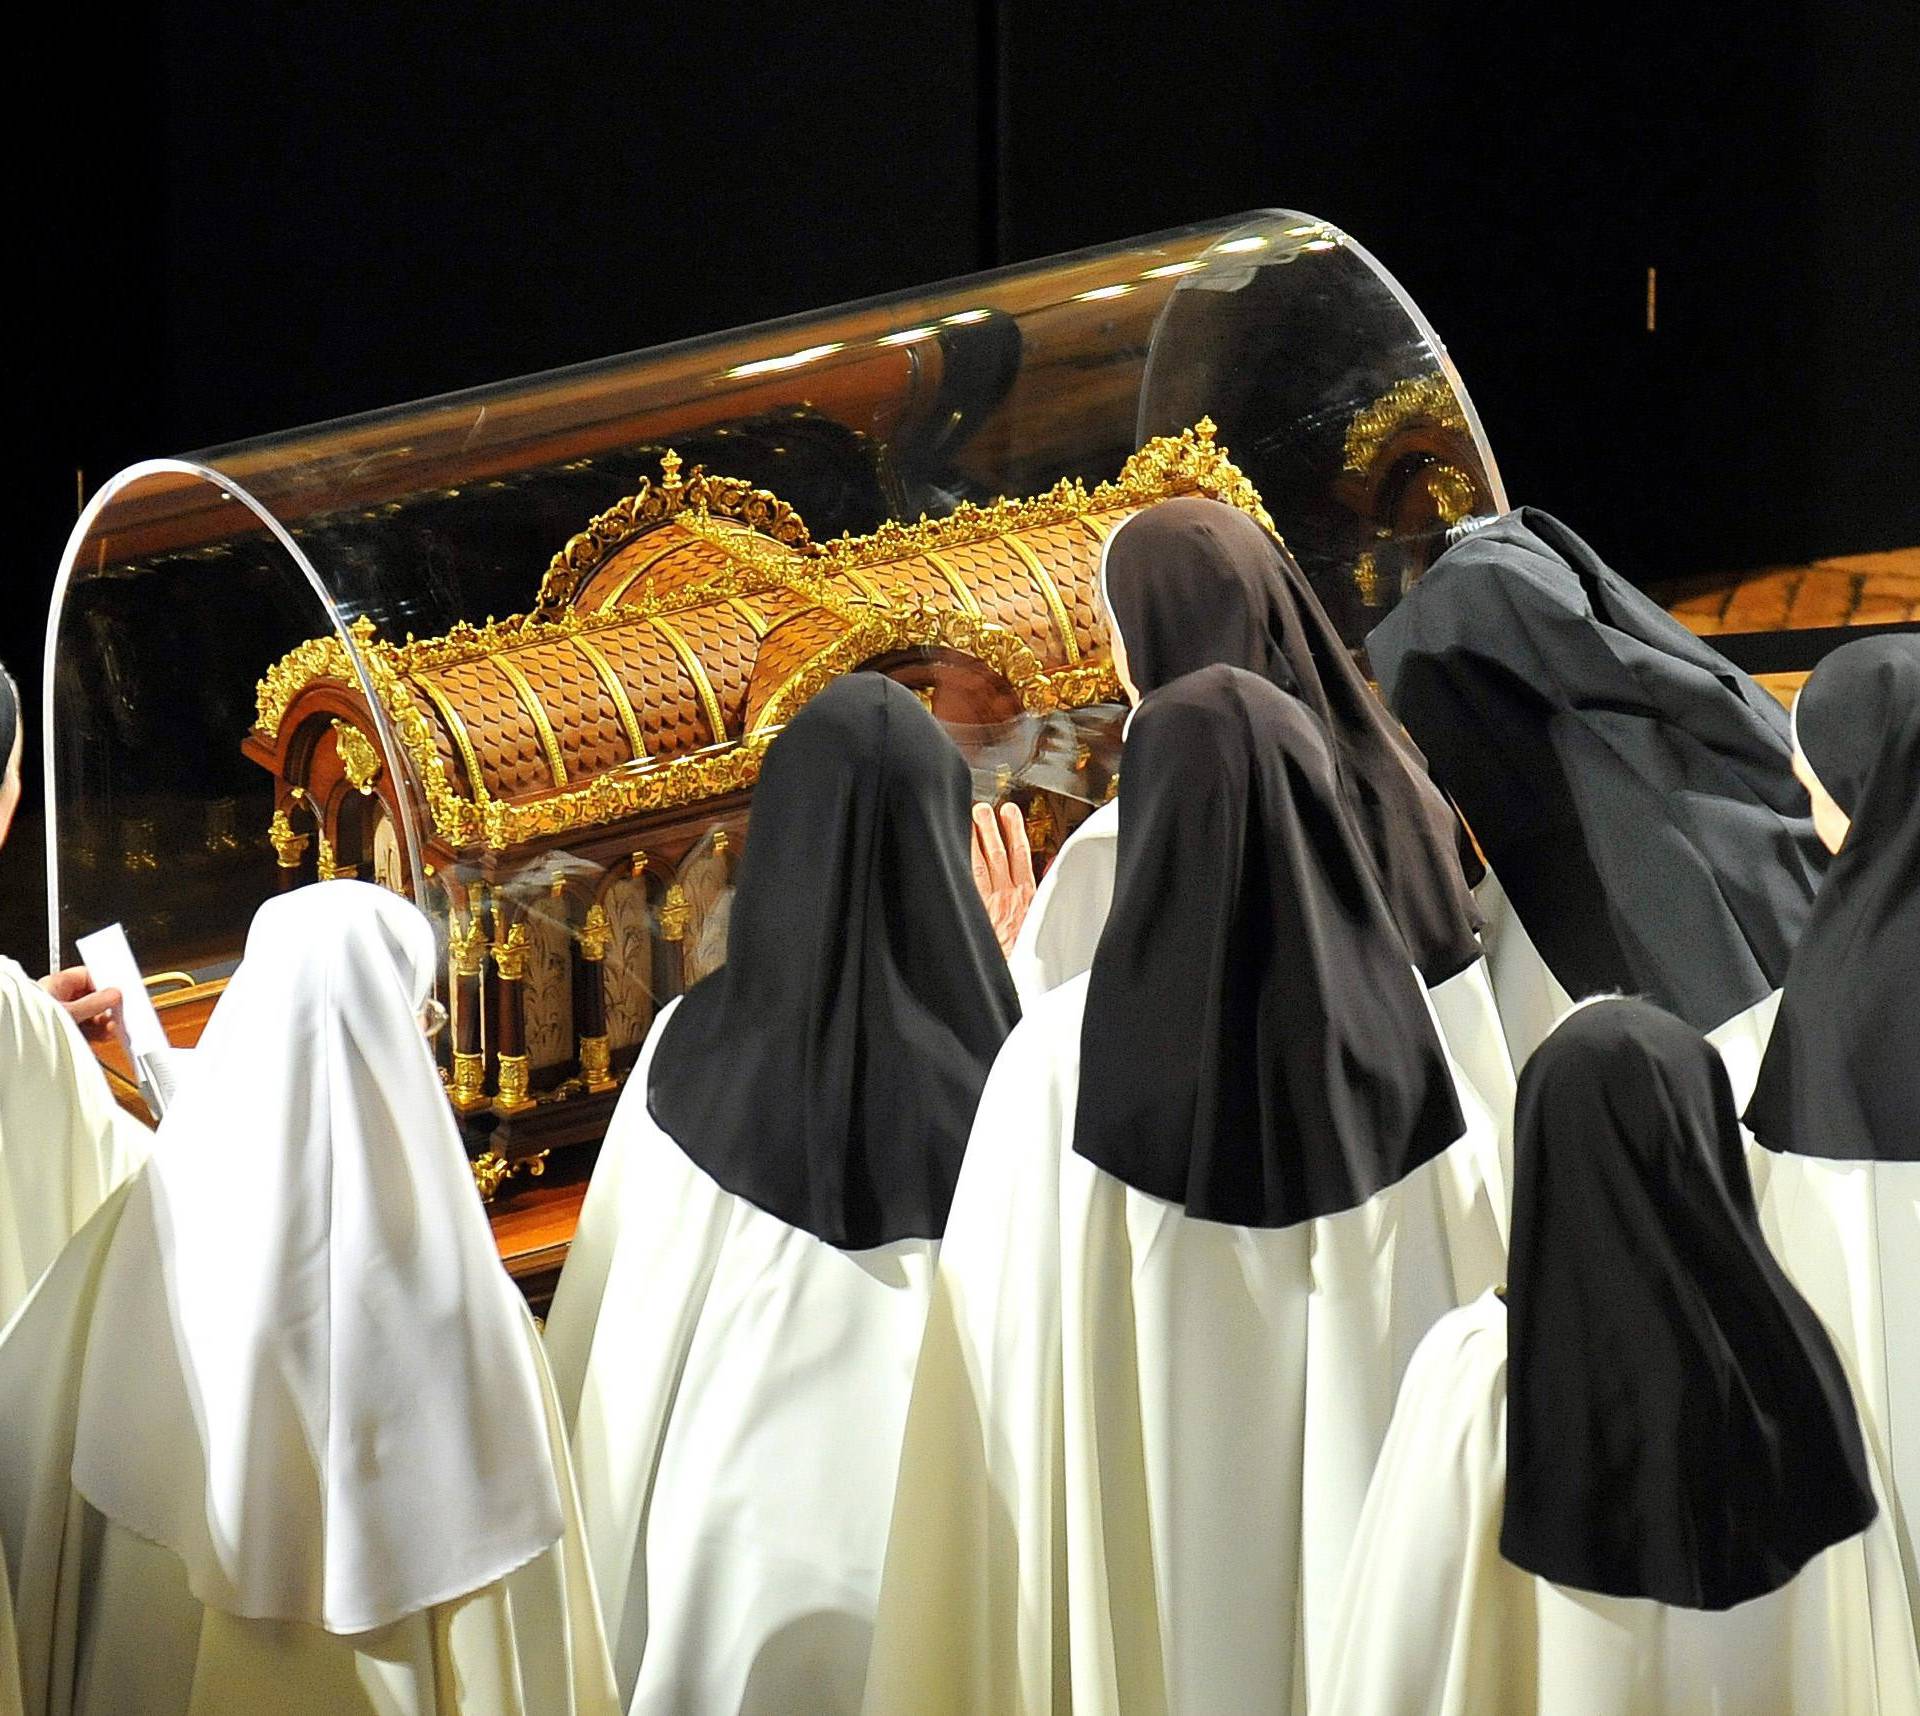 St Therese of Lisieux relics on tour